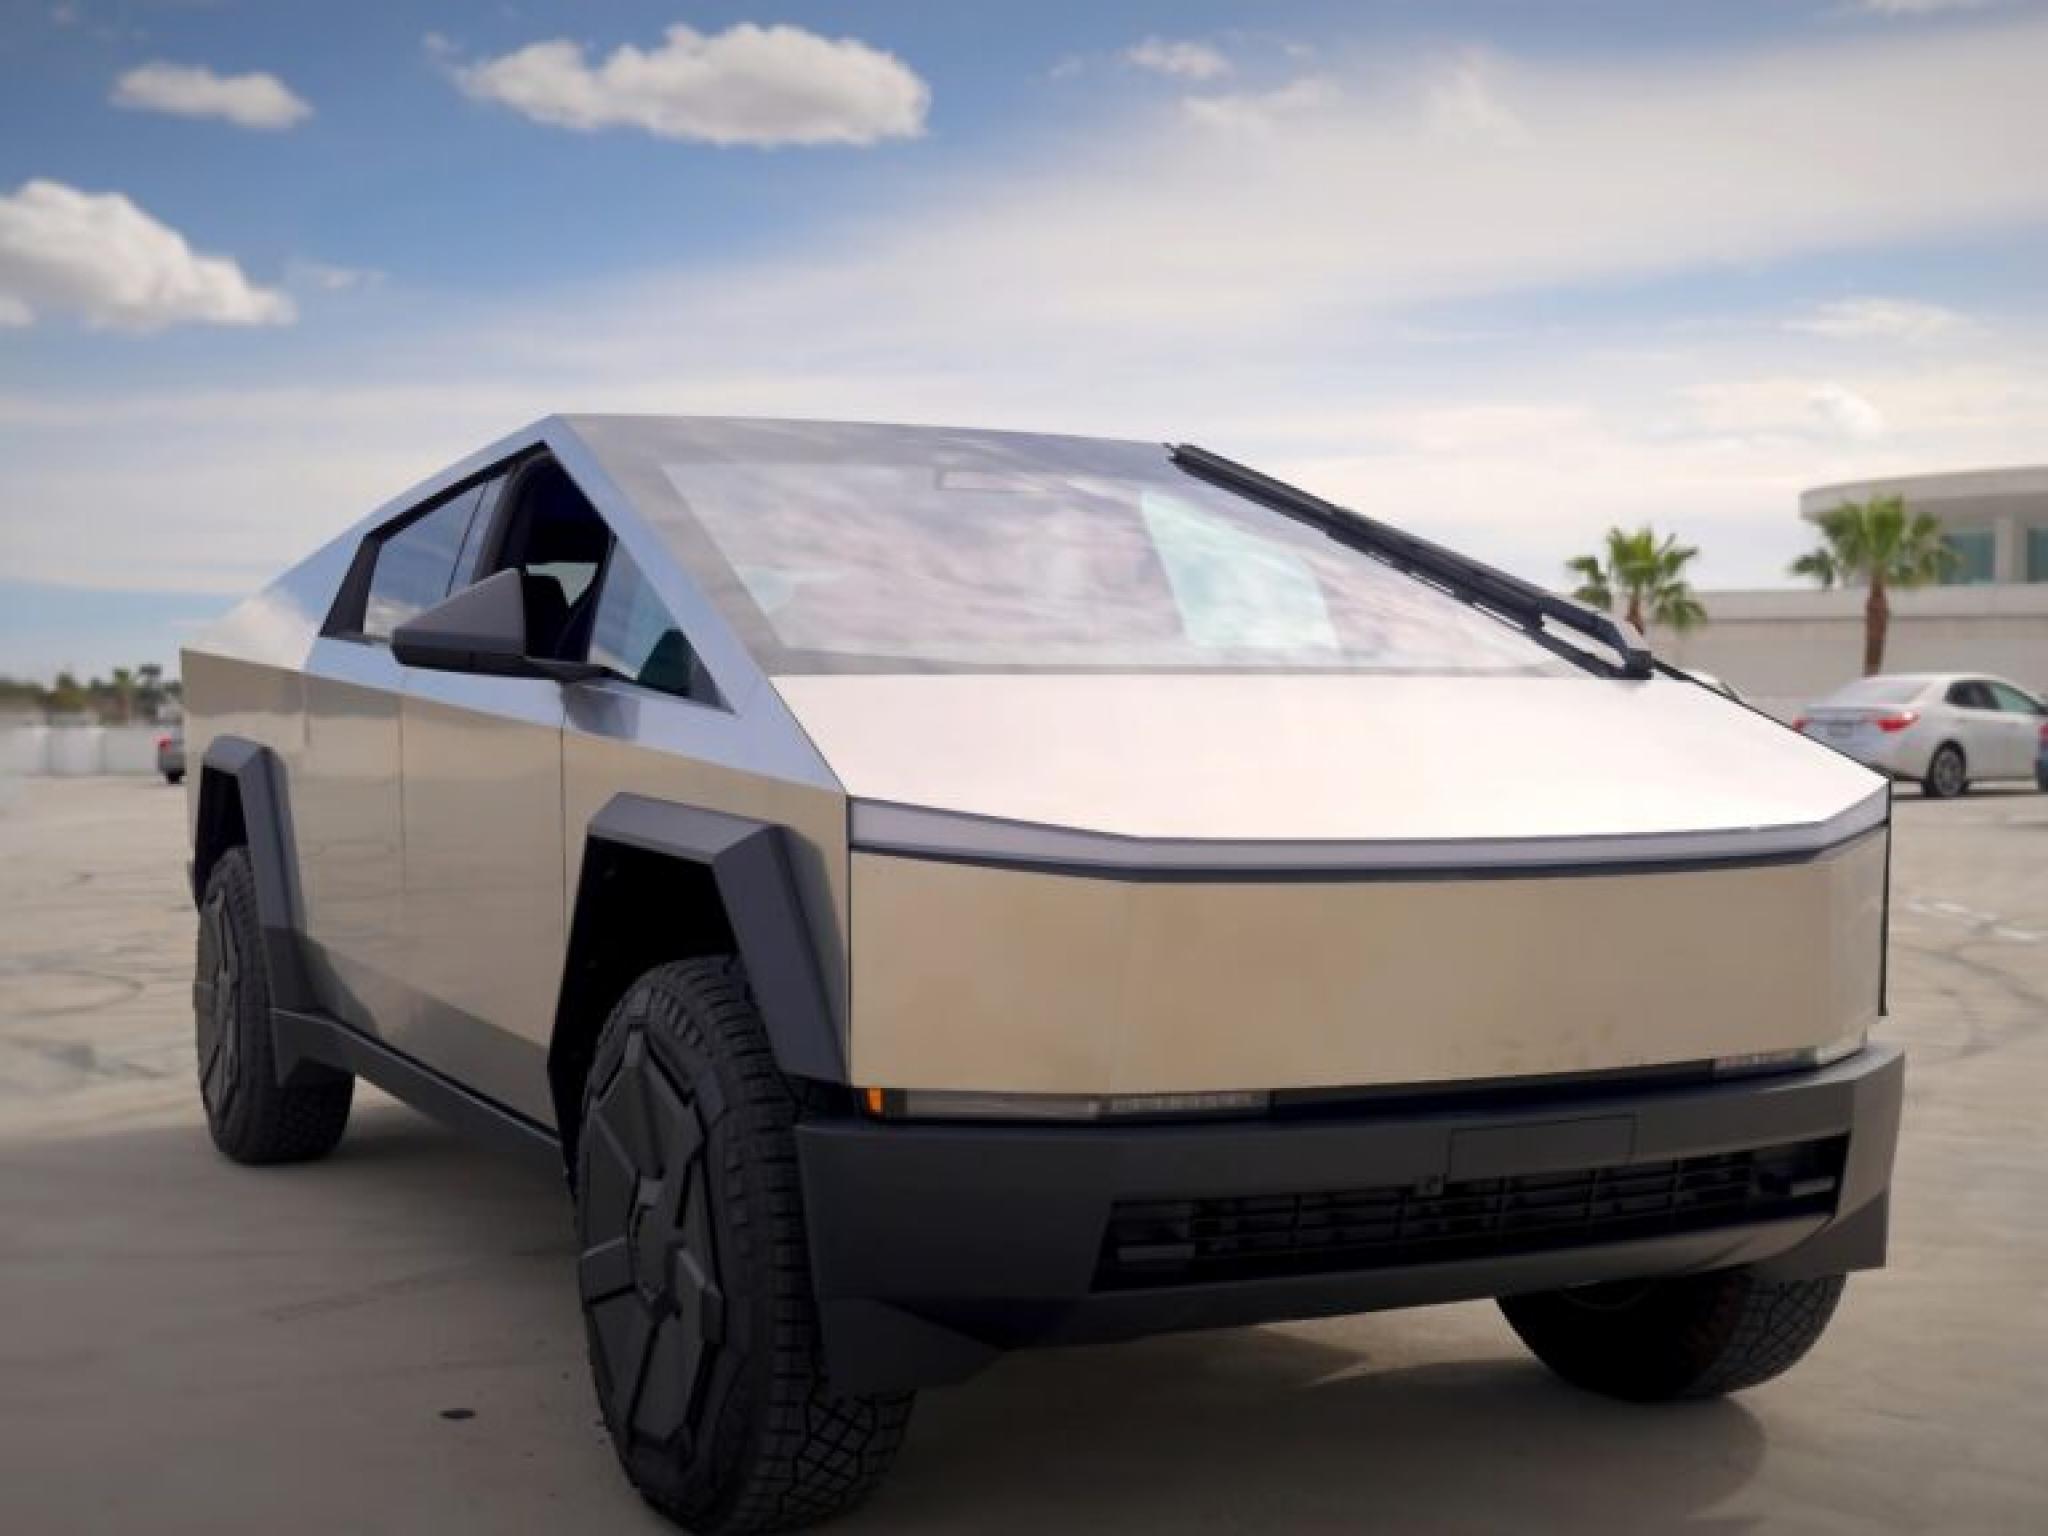  tesla-hints-cybertruck-was-most-sold-ev-truck-in-us-in-q2-but-elon-musks-company-has-not-released-data-to-back-it-up 